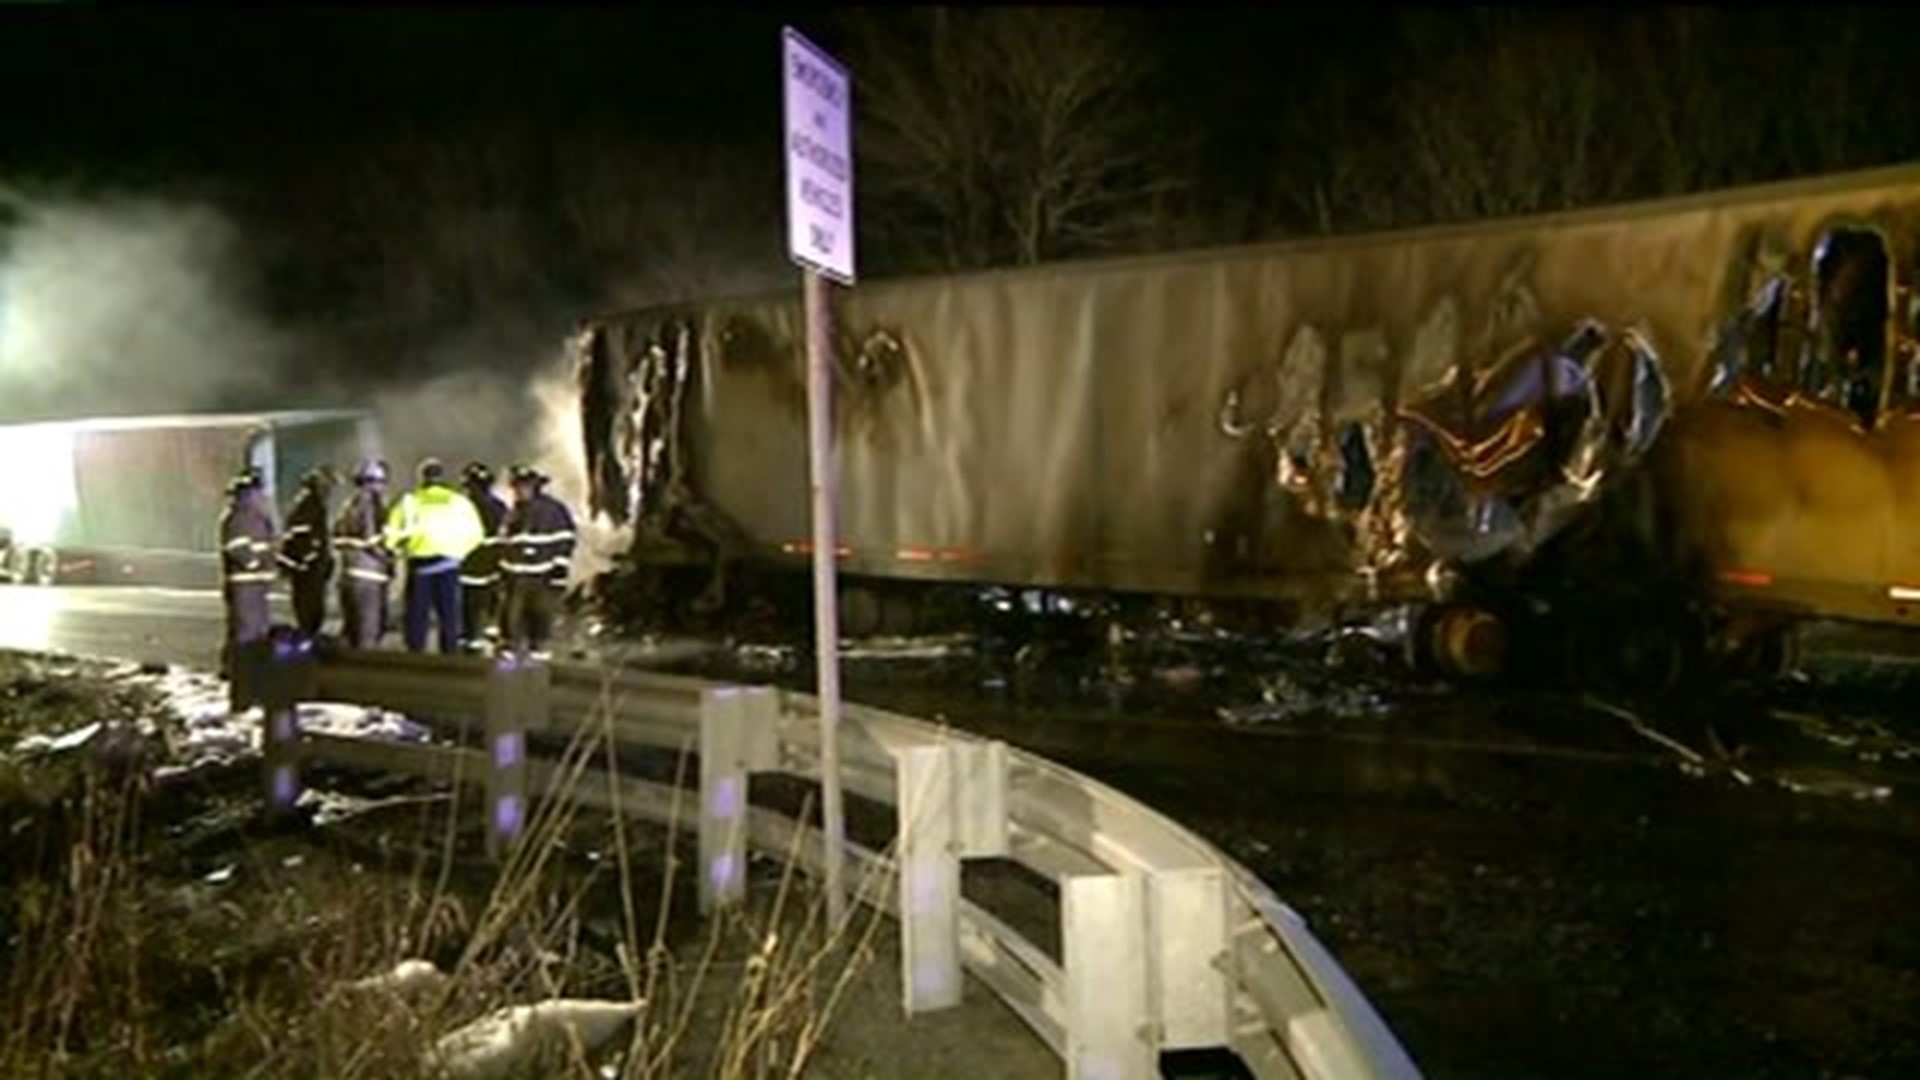 Interstate Closed for 12 Hours After Fiery Wreck